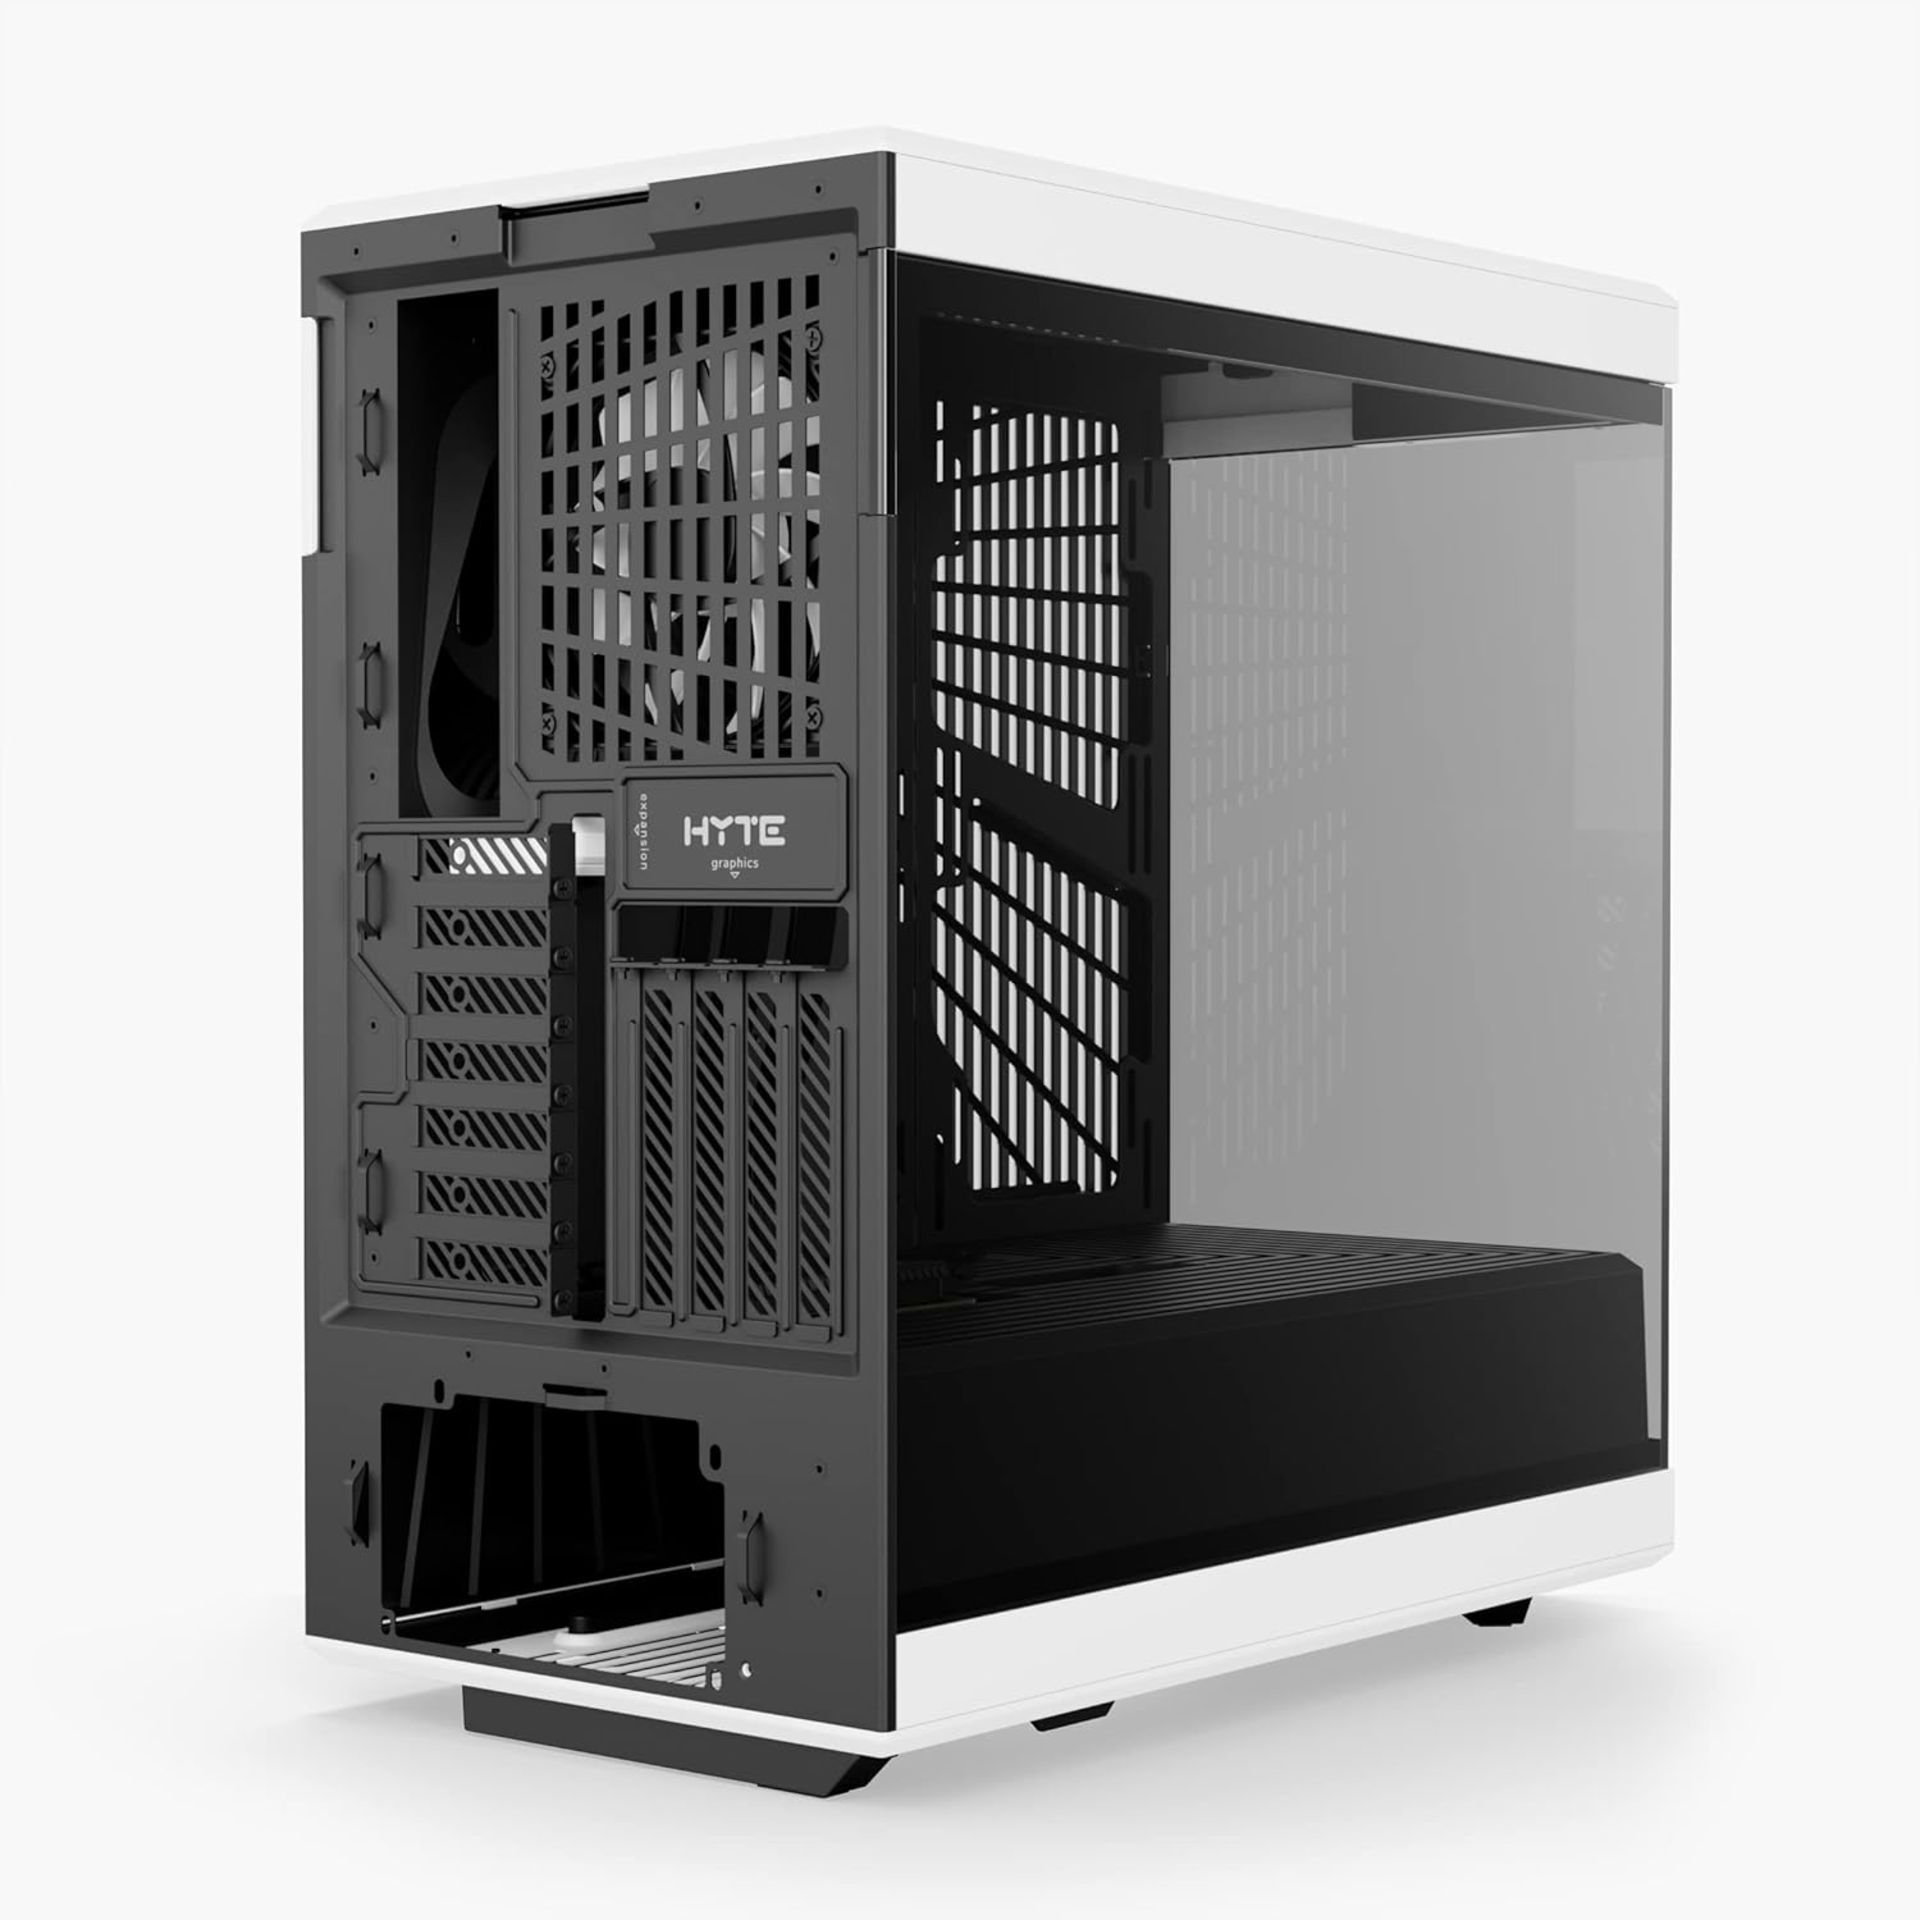 NEW & BOXED HYTE Y40 Mid-Tower ATX Case - Black & White. RRP £159.98. (R15R). The HYTE Y40 Mid-Tower - Bild 5 aus 6